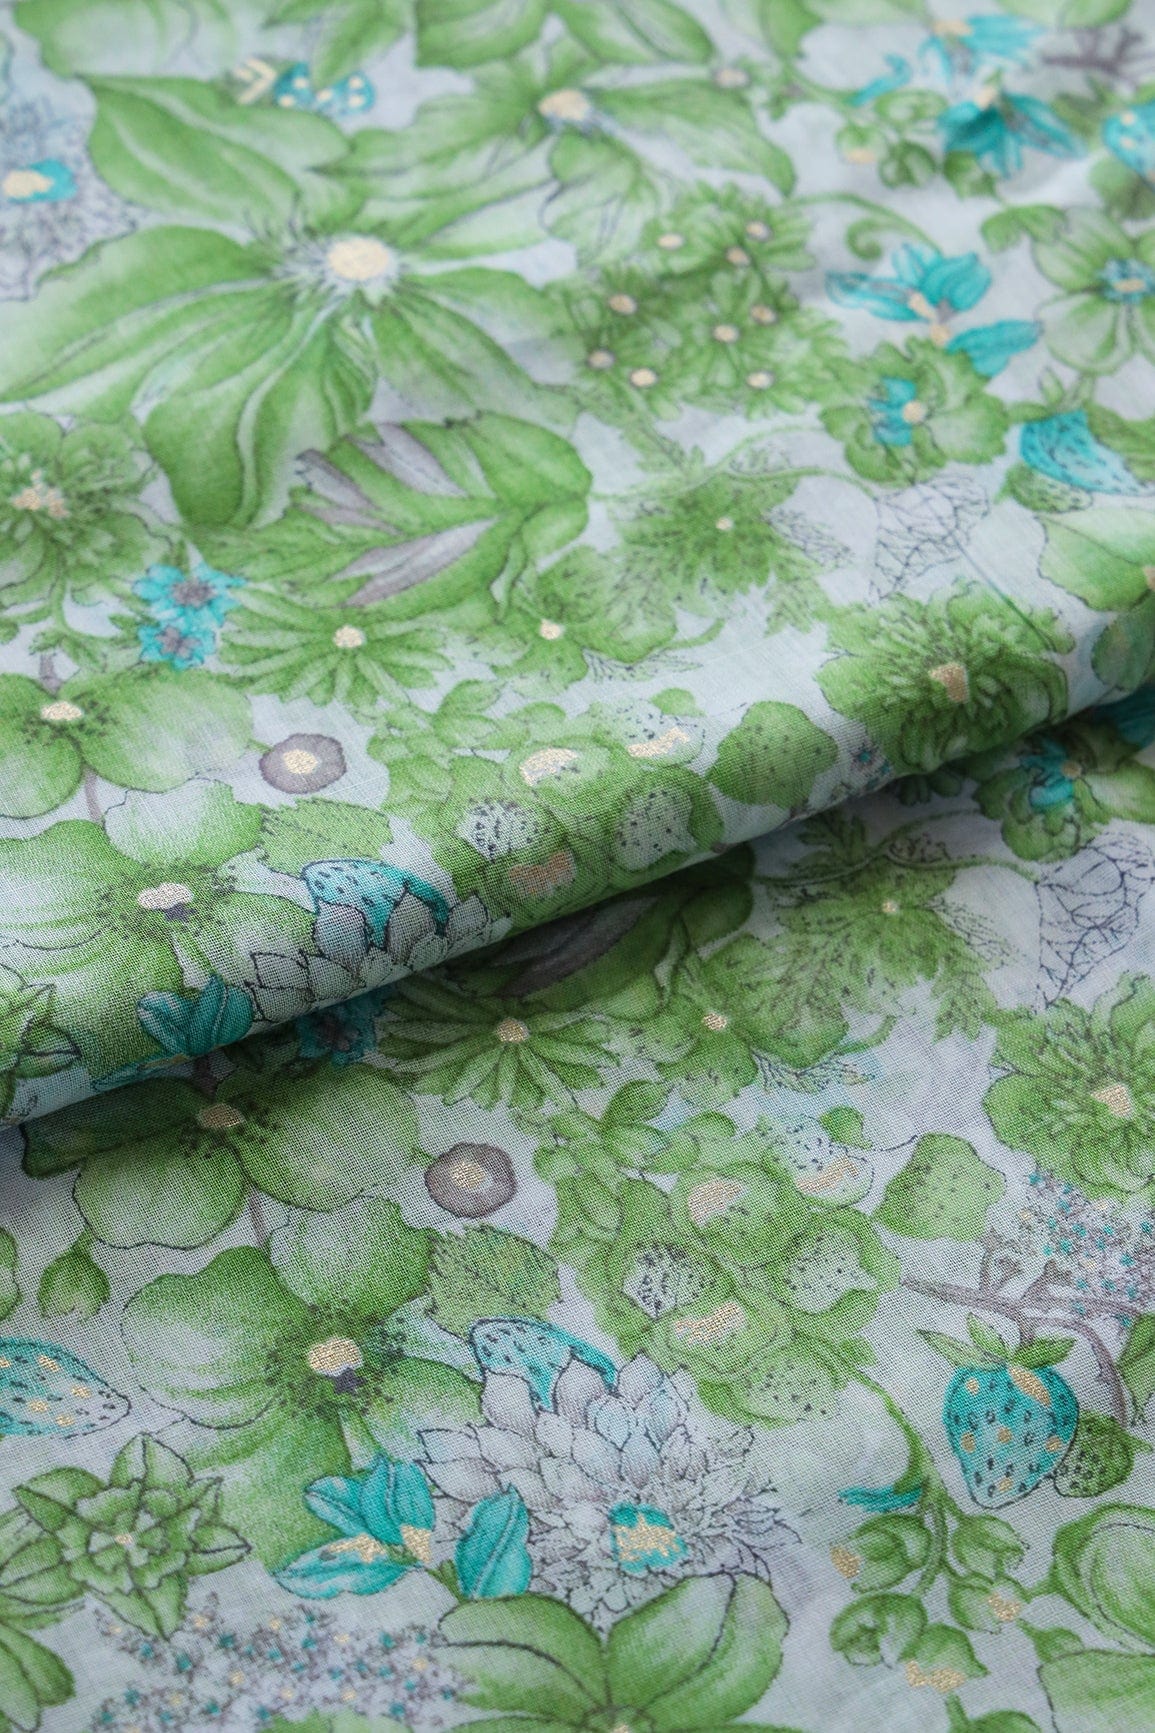 doeraa Prints Mint Green Floral With Foil Print On White Pure Mul Cotton Fabric